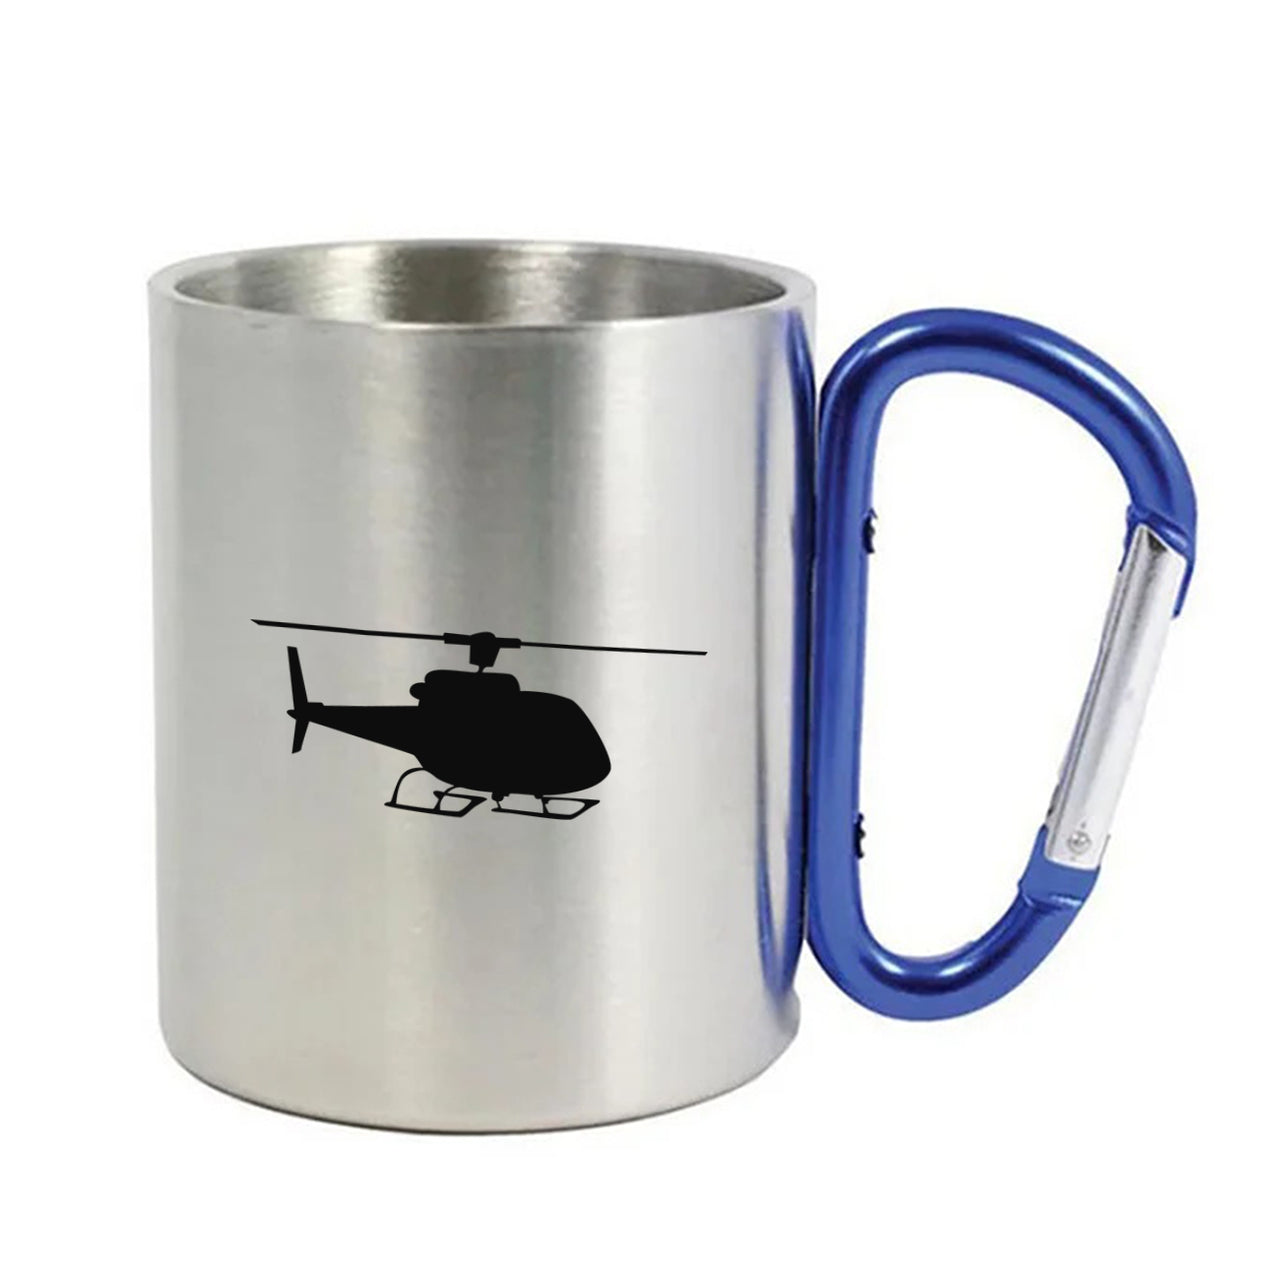 Helicopter Designed Stainless Steel Outdoors Mugs